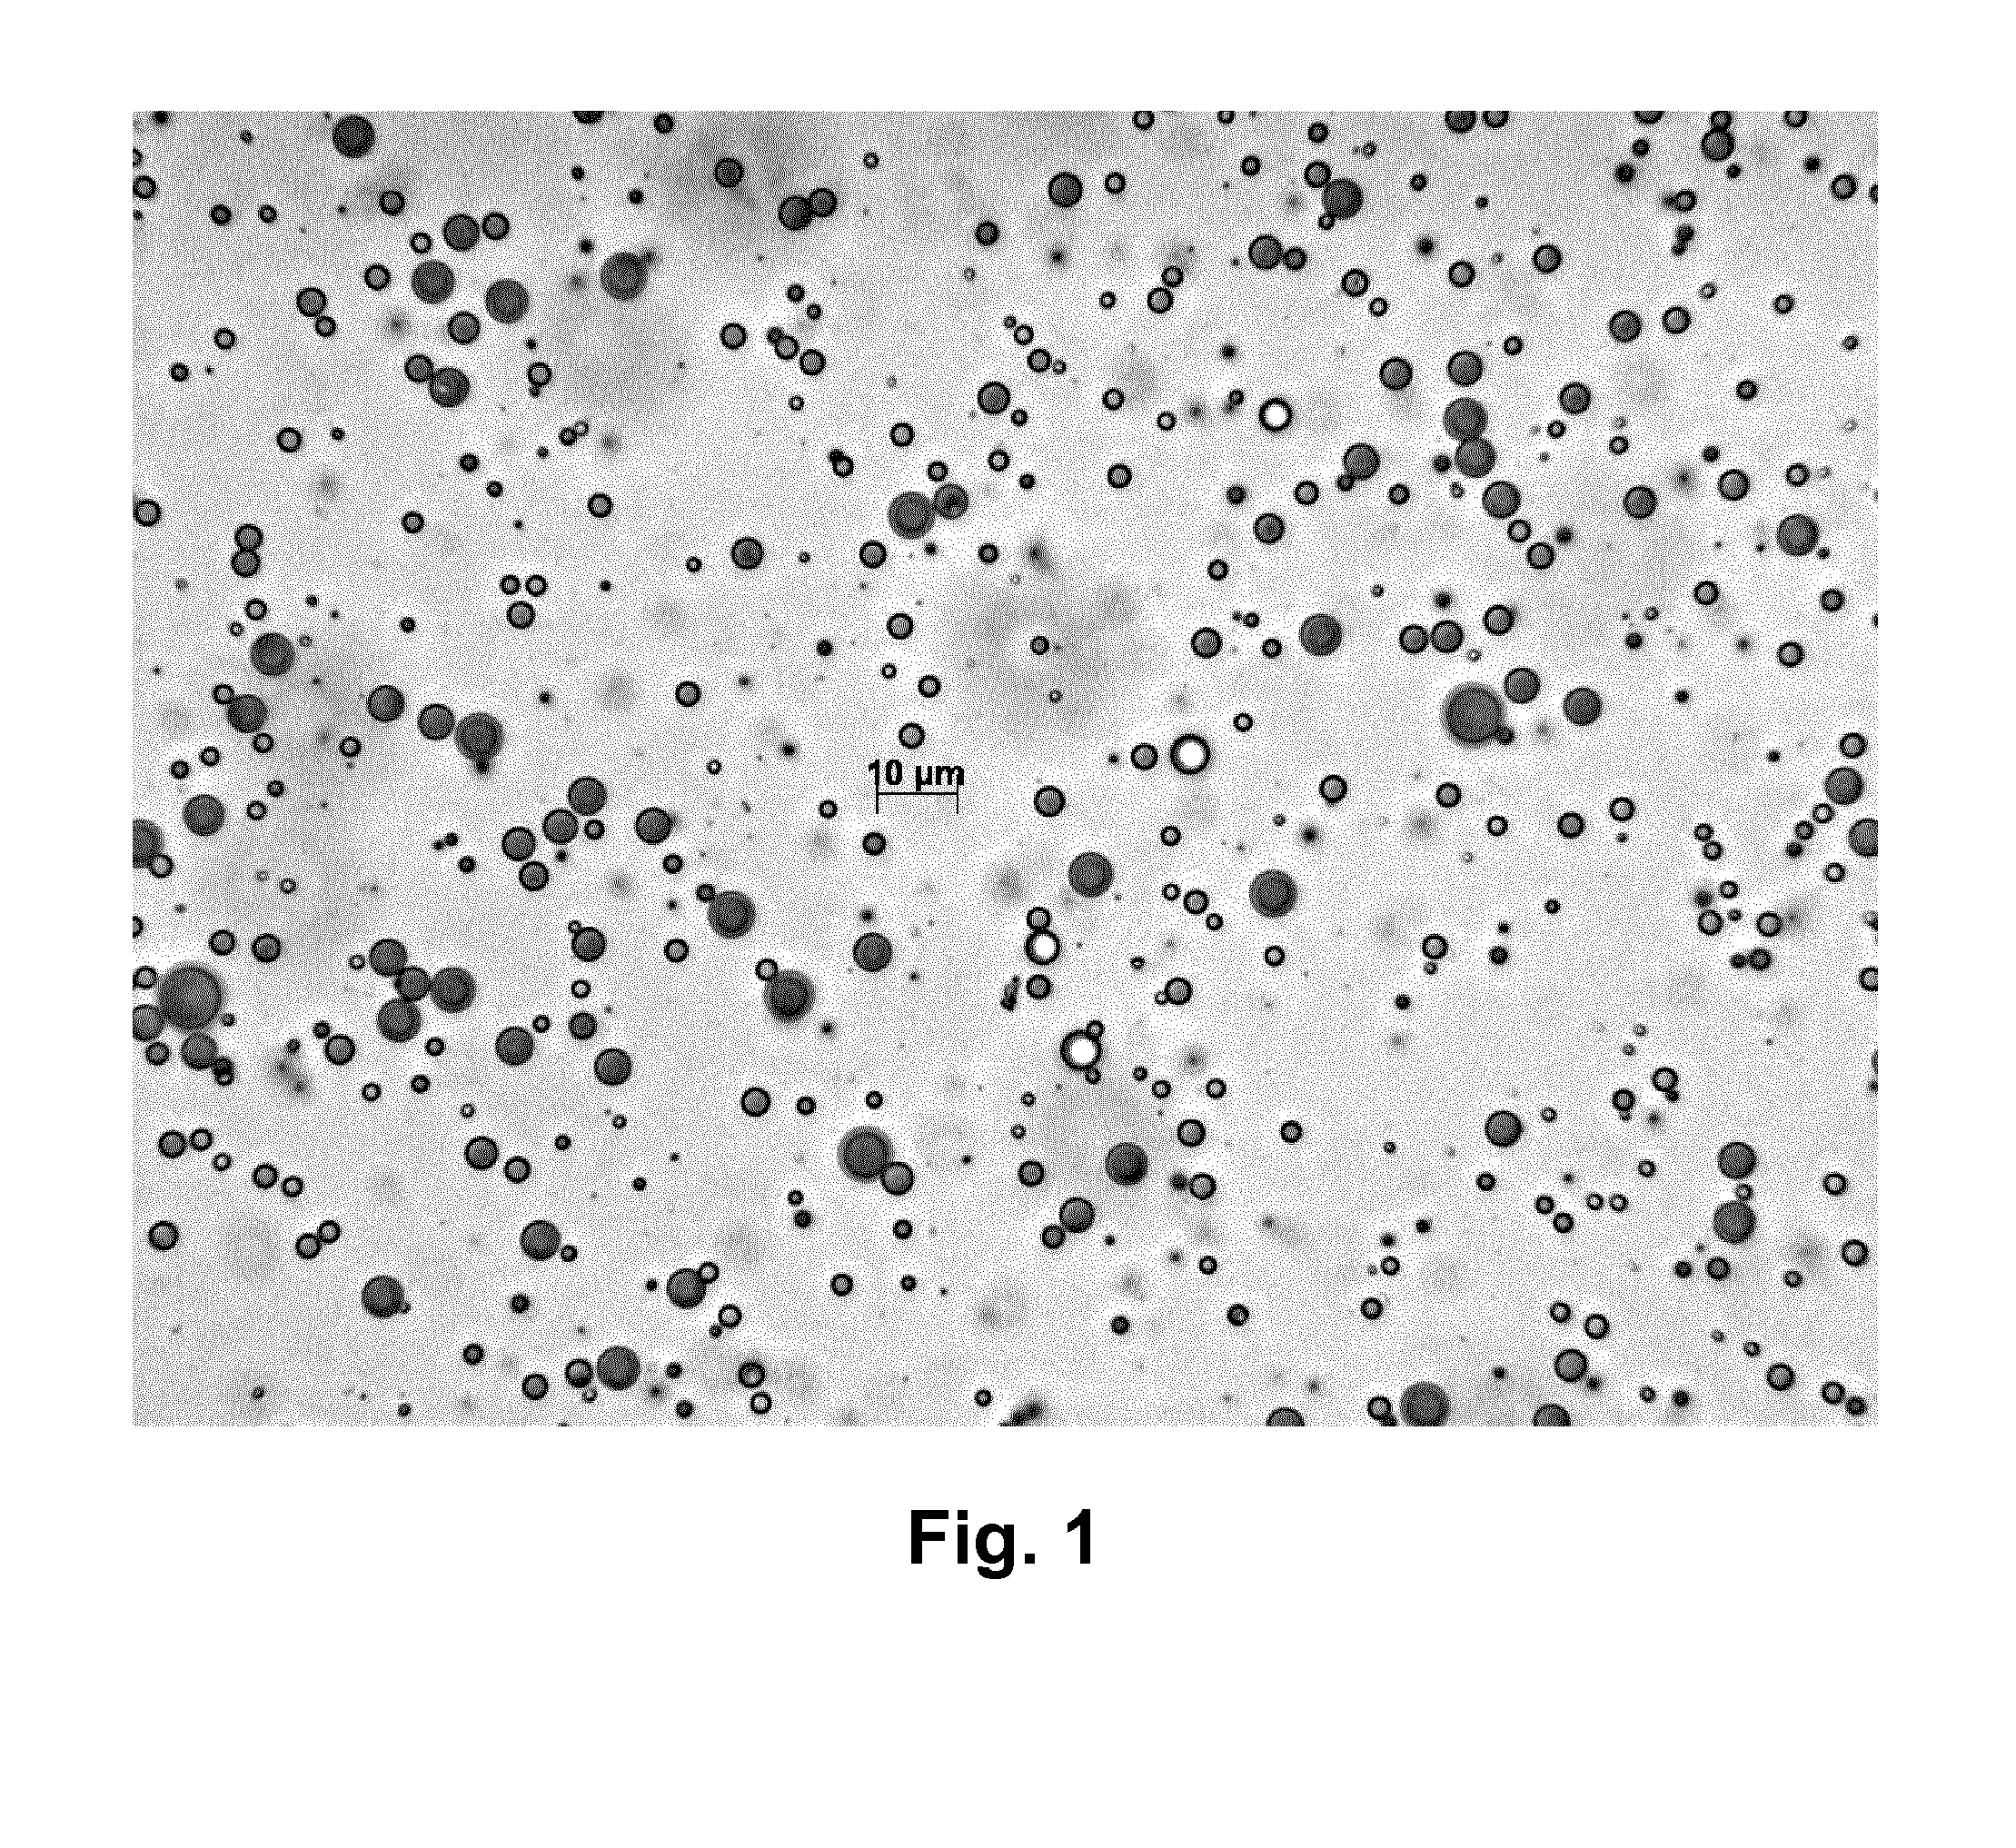 Herbicidal composition comprising polymeric microparticles containing a herbicide